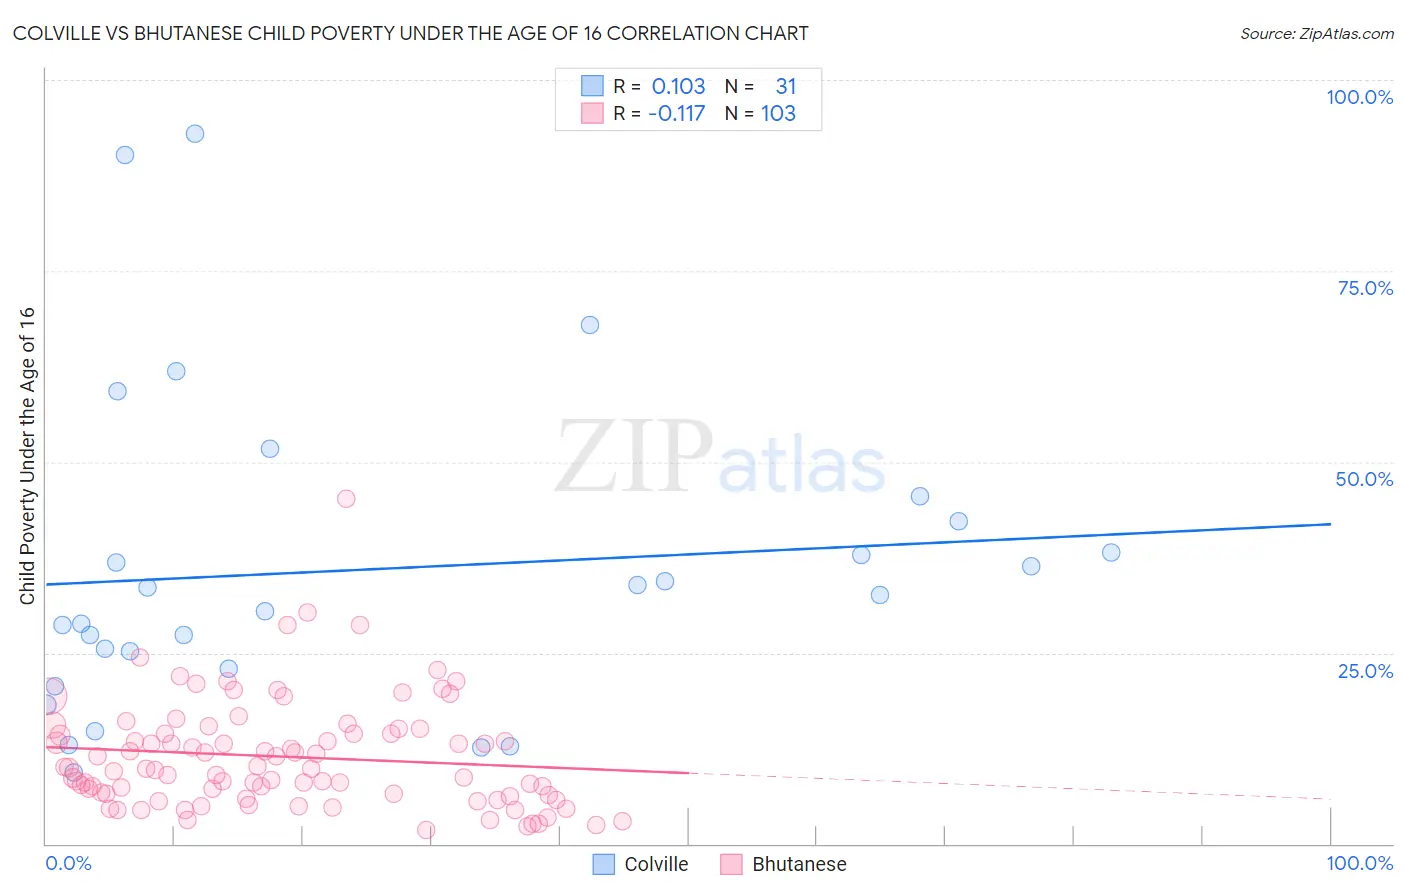 Colville vs Bhutanese Child Poverty Under the Age of 16